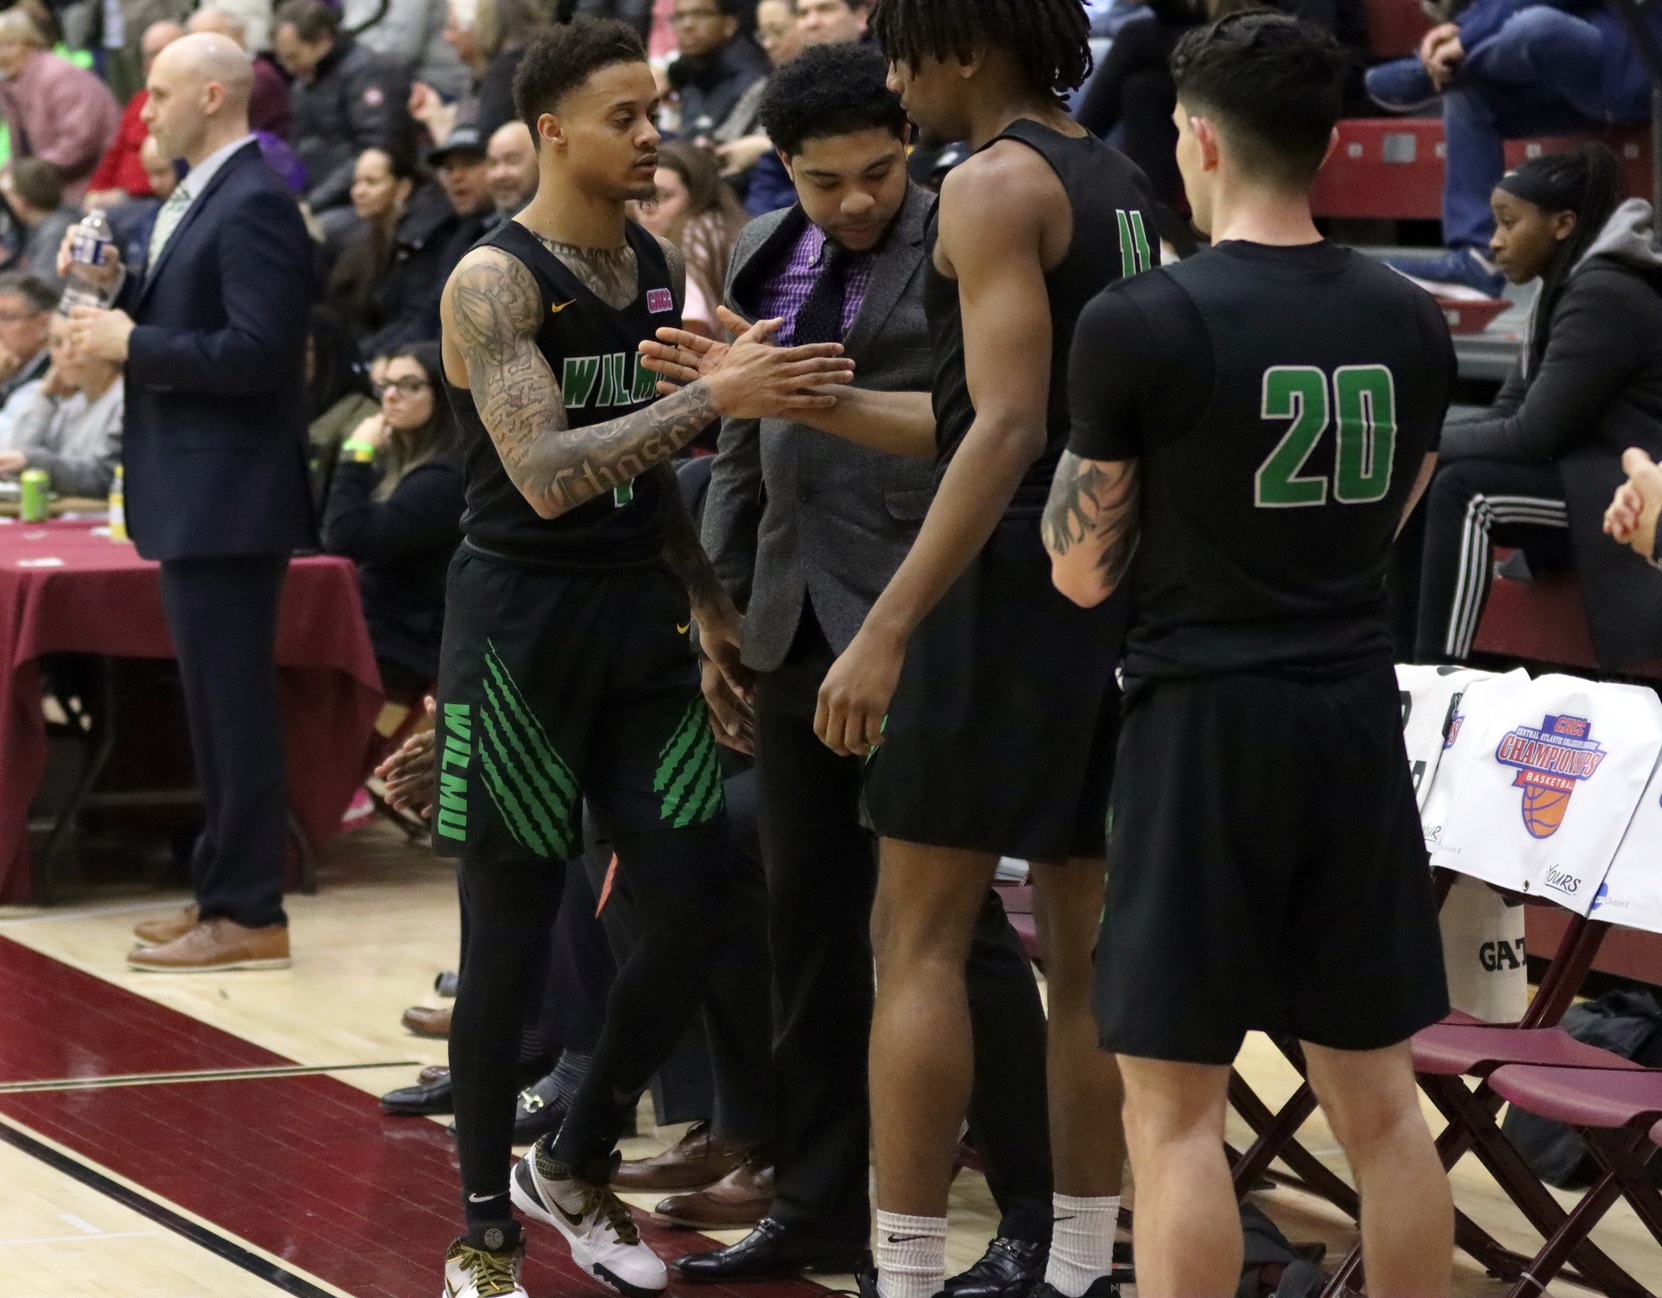 Photo of Jermaine Head at the end of the CACC Tournament Semifinals. Copyright 2020; Wilmington University. All rights reserved. Photo by Dan Lauletta. March 7, 2020 vs. Jefferson at CACC Tournament at USciences.